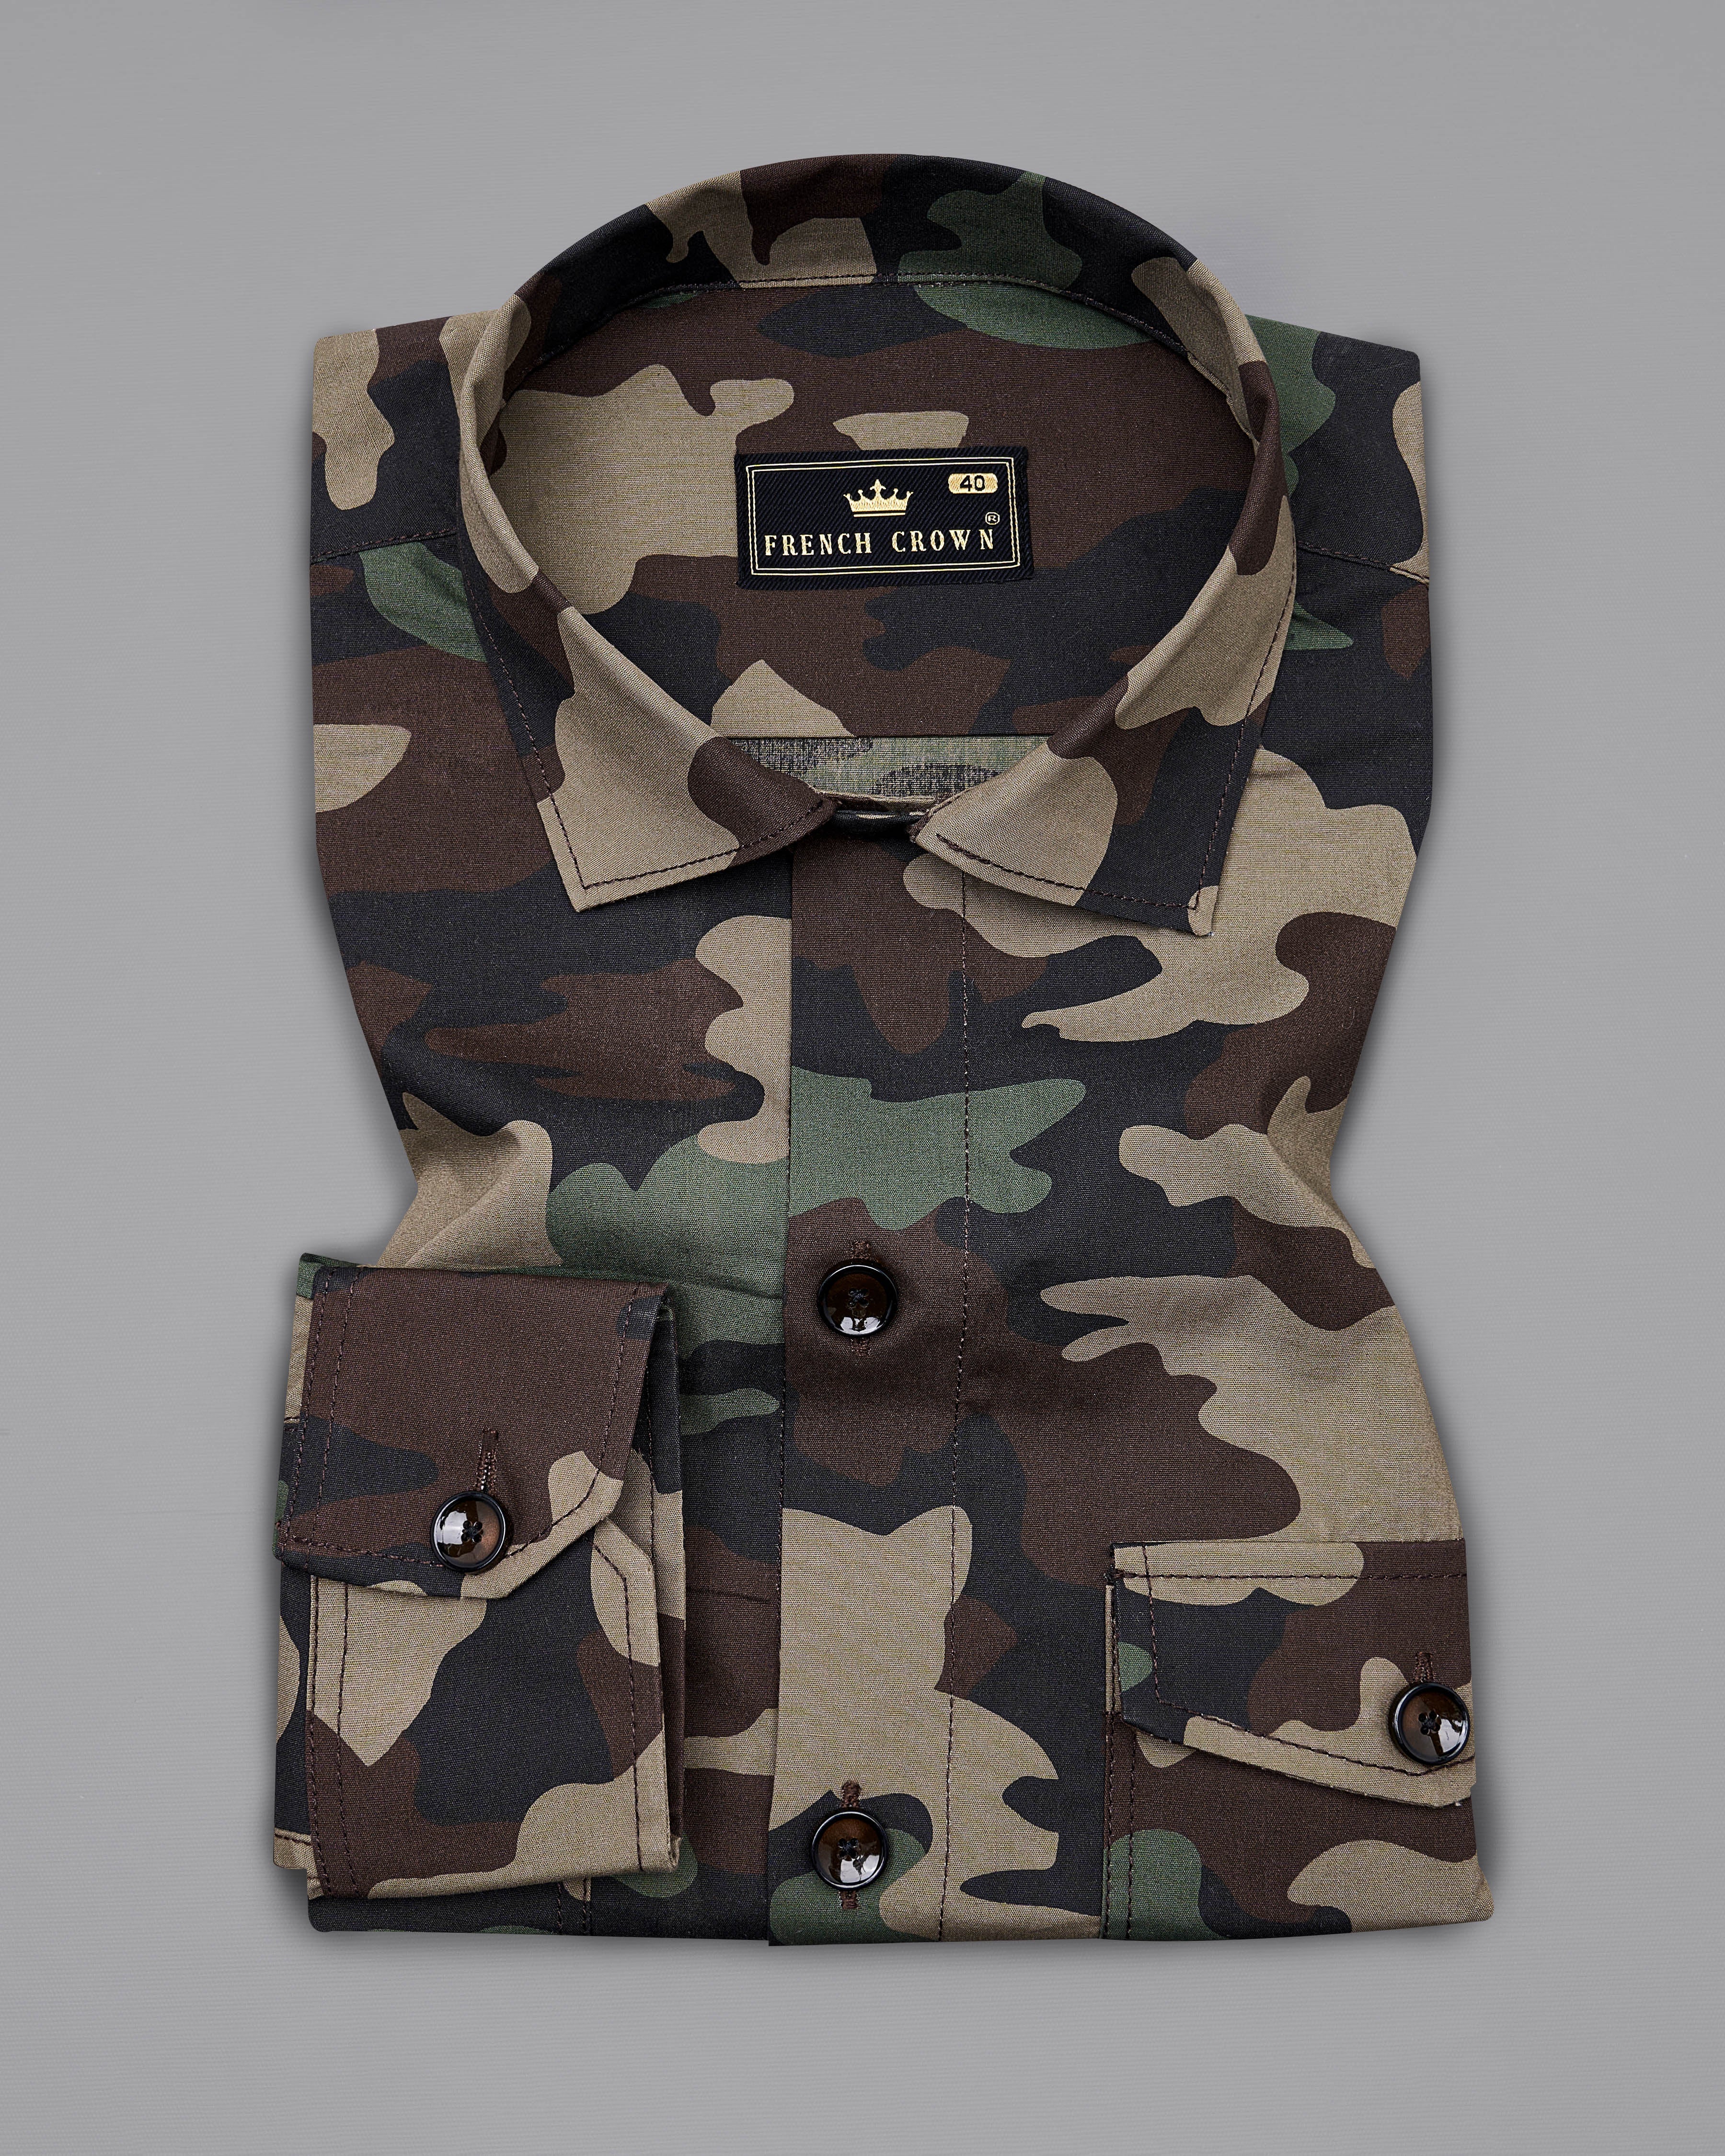 Bronco Brown with Ironside Green Camouflage Printed Royal Oxford Designer OverShirt 8932-BLK-P327-38, 8932-BLK-P327-H-38,  8932-BLK-P327-39,  8932-BLK-P327-H-39,  8932-BLK-P327-40,  8932-BLK-P327-H-40,  8932-BLK-P327-42,  8932-BLK-P327-H-42,  8932-BLK-P327-44,  8932-BLK-P327-H-44,  8932-BLK-P327-46,  8932-BLK-P327-H-46,  8932-BLK-P327-48,  8932-BLK-P327-H-48,  8932-BLK-P327-50,  8932-BLK-P327-H-50,  8932-BLK-P327-52,  8932-BLK-P327-H-52